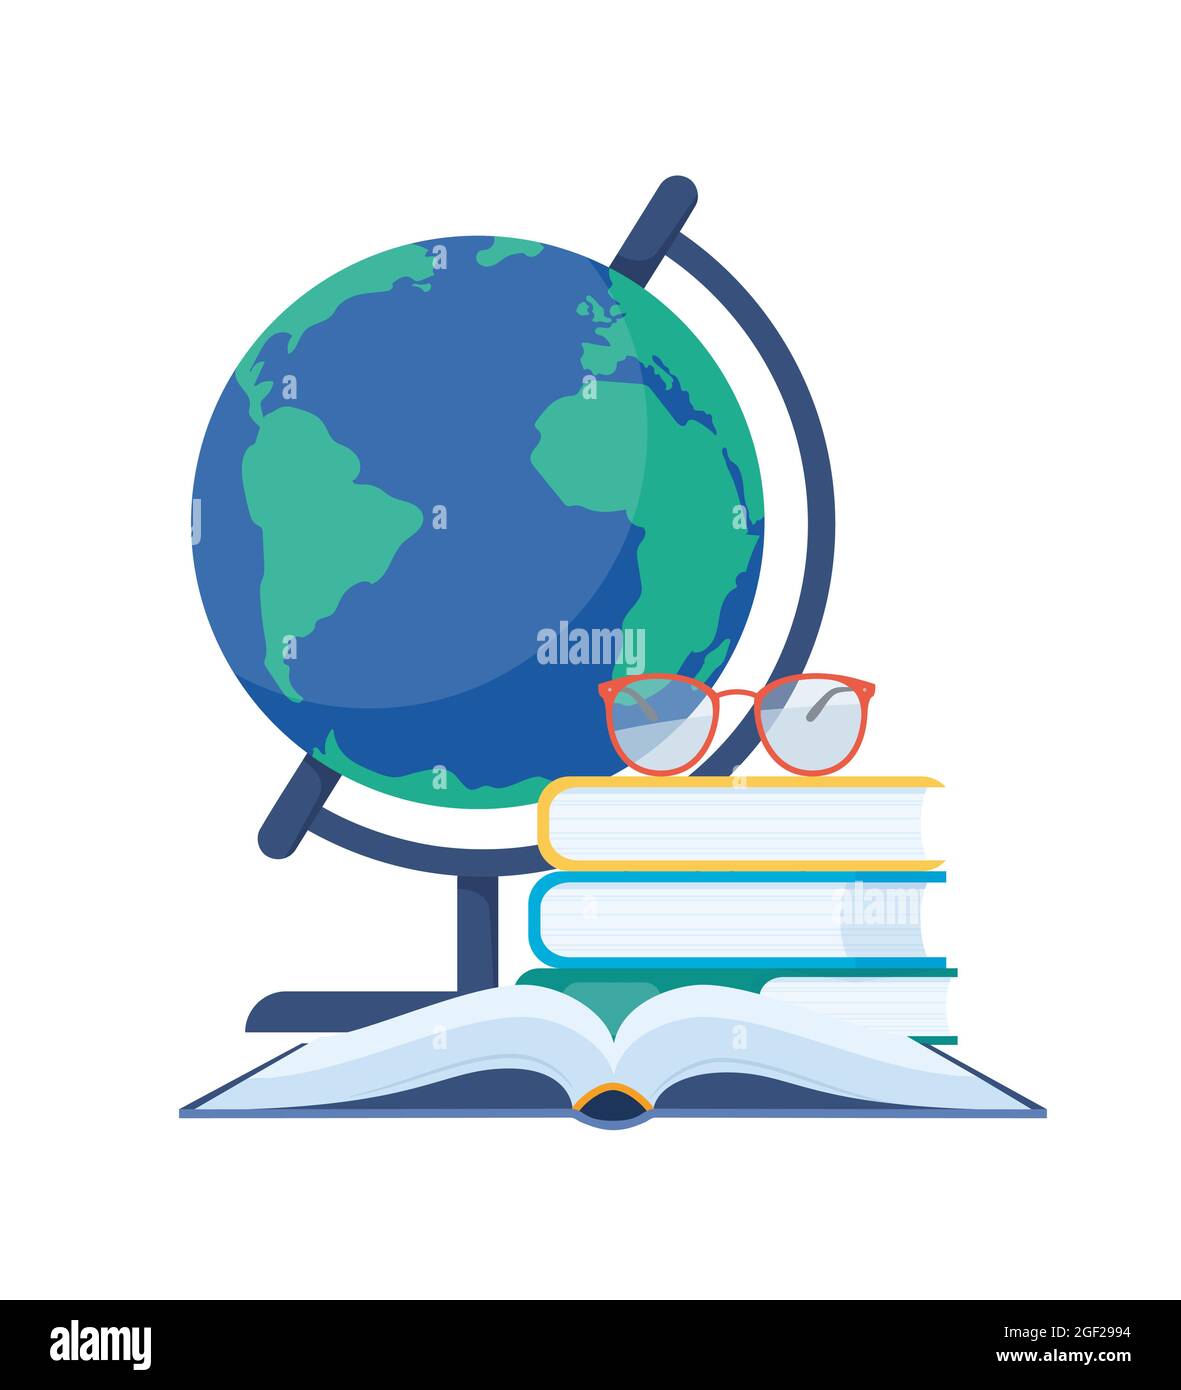 School globe and books. Back to school concept. Classroom earth model on stand. Sphere map of continent and ocean. Geography learning tool. Vector ill Stock Vector